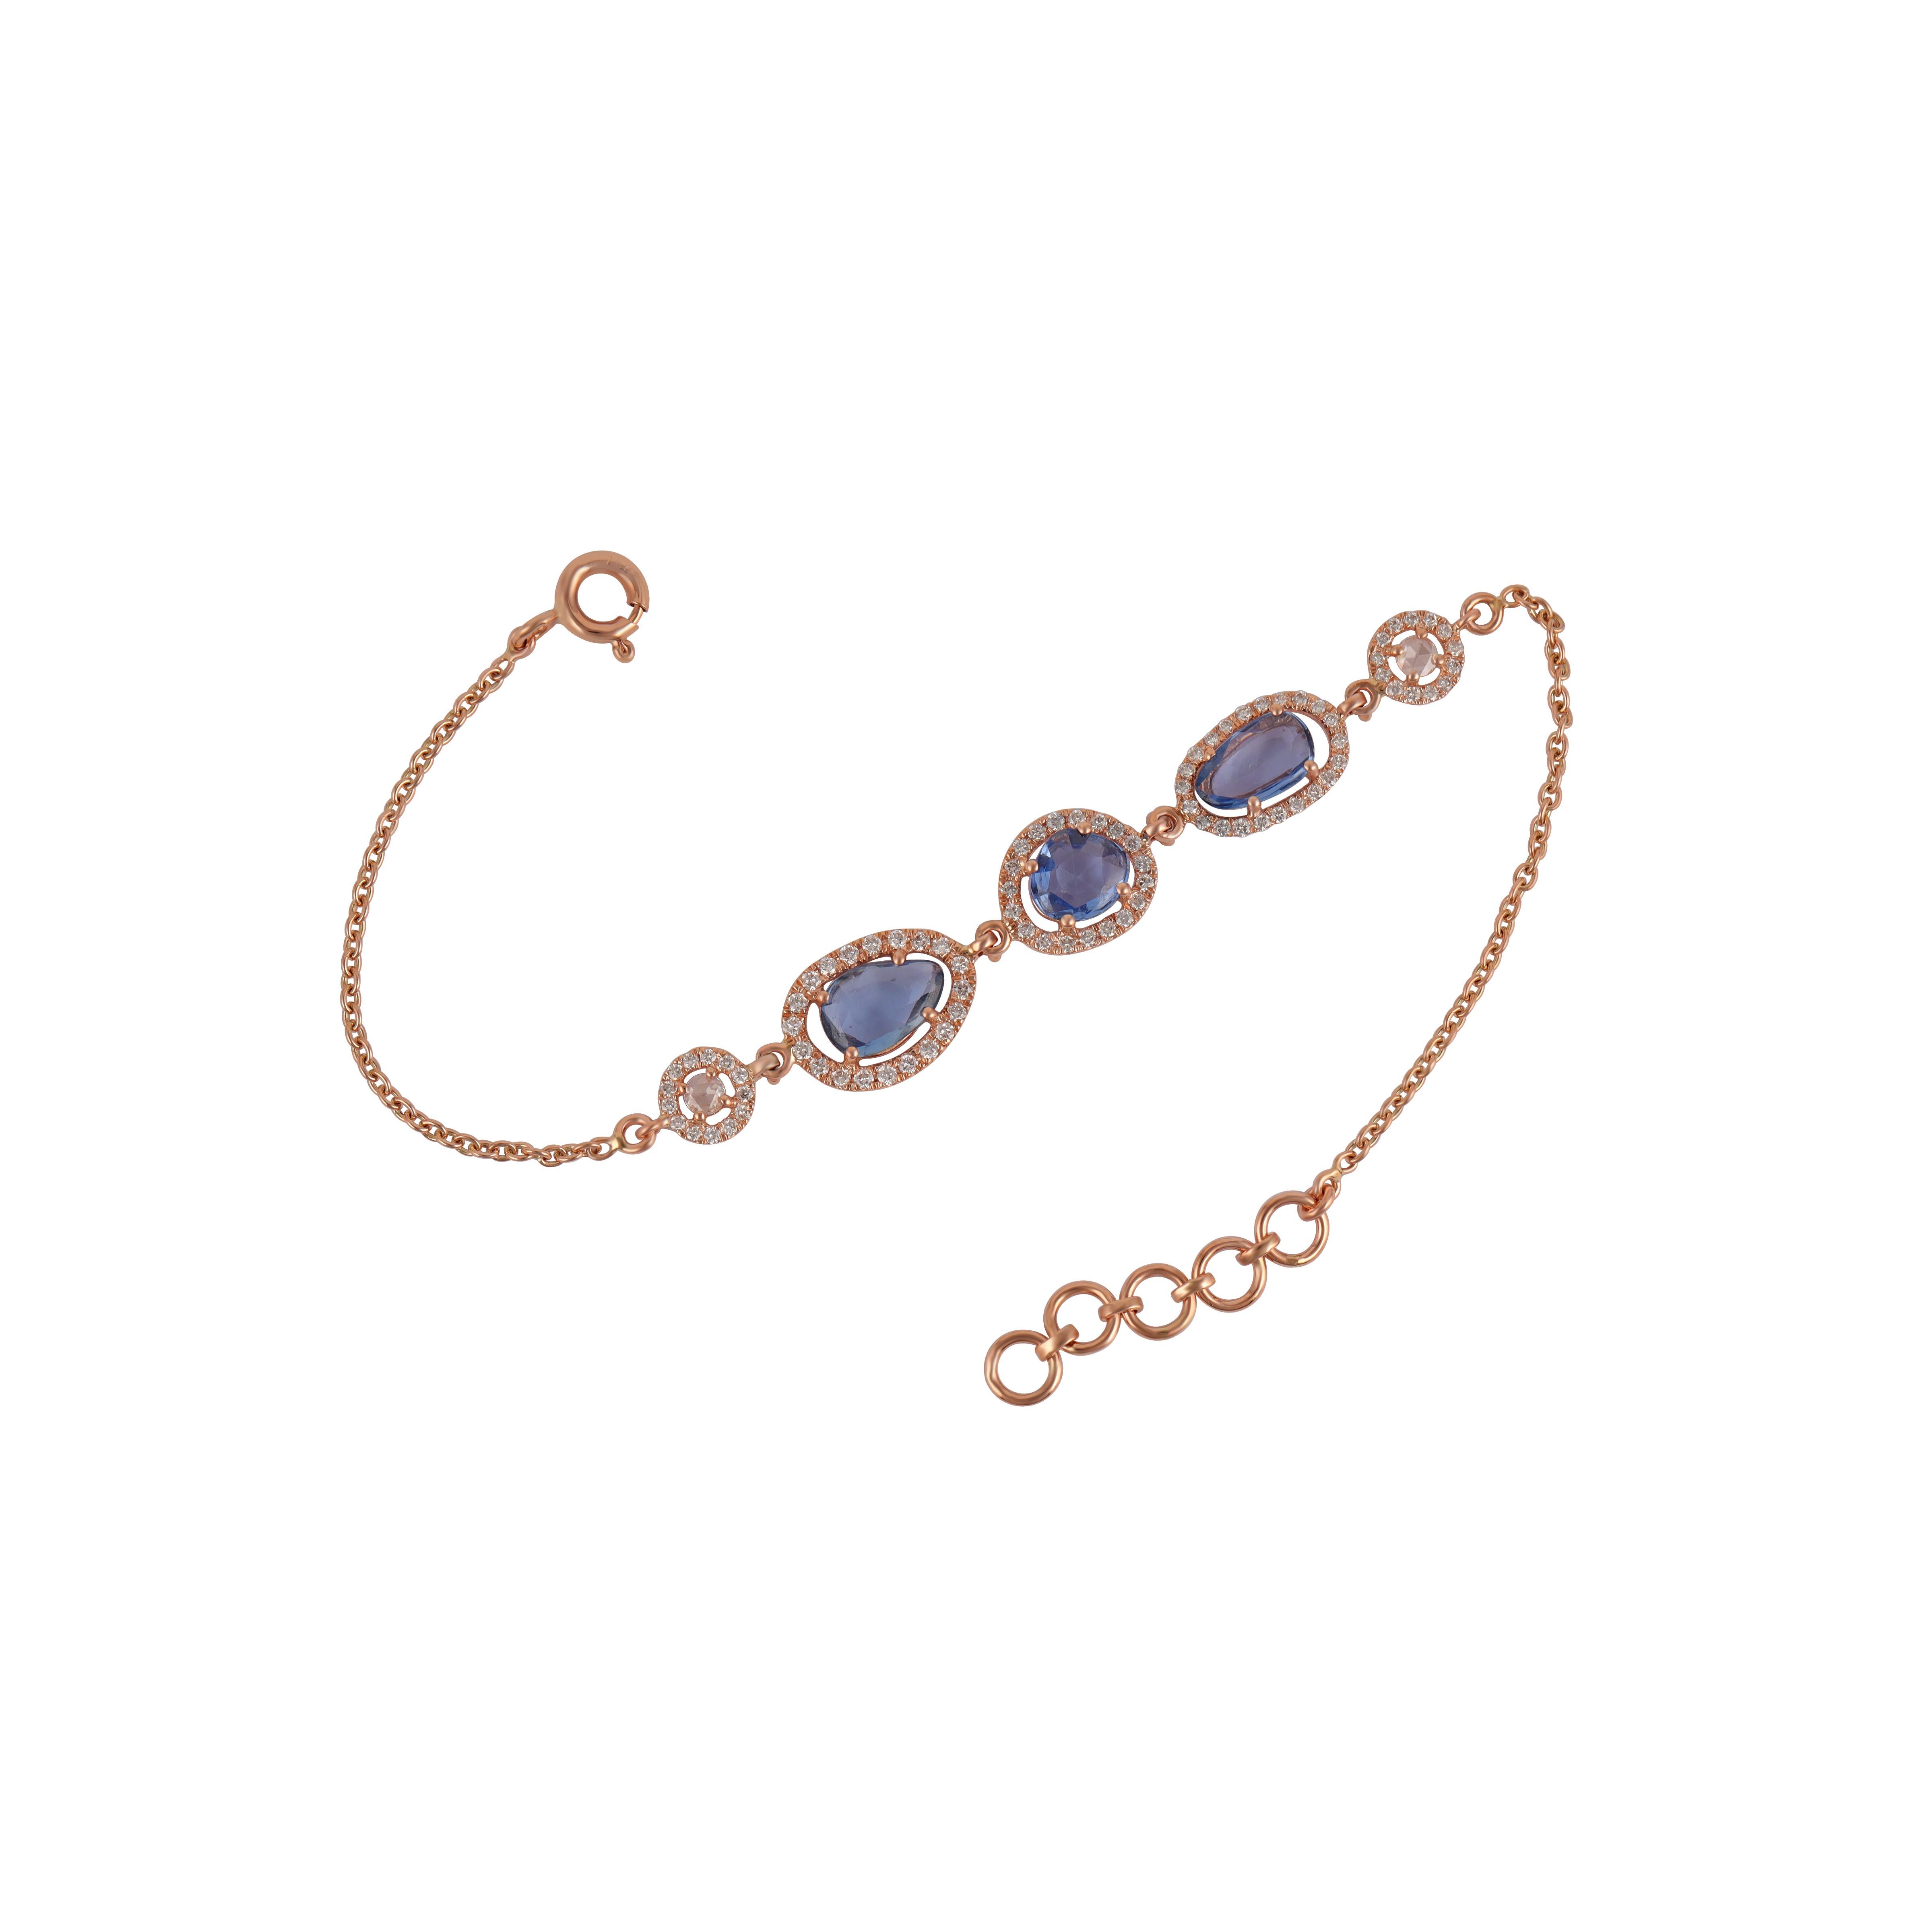 A very beautiful and dainty Sapphire Chain Bracelet let in 18K Gold & Diamonds. The weight of the Multi Sapphires is 2.41 carats. The weight of the Diamonds is 0.58 carats. Net Gold weight is 3.83 Gram. 
 Bracelet size - 7.5 inches and can be